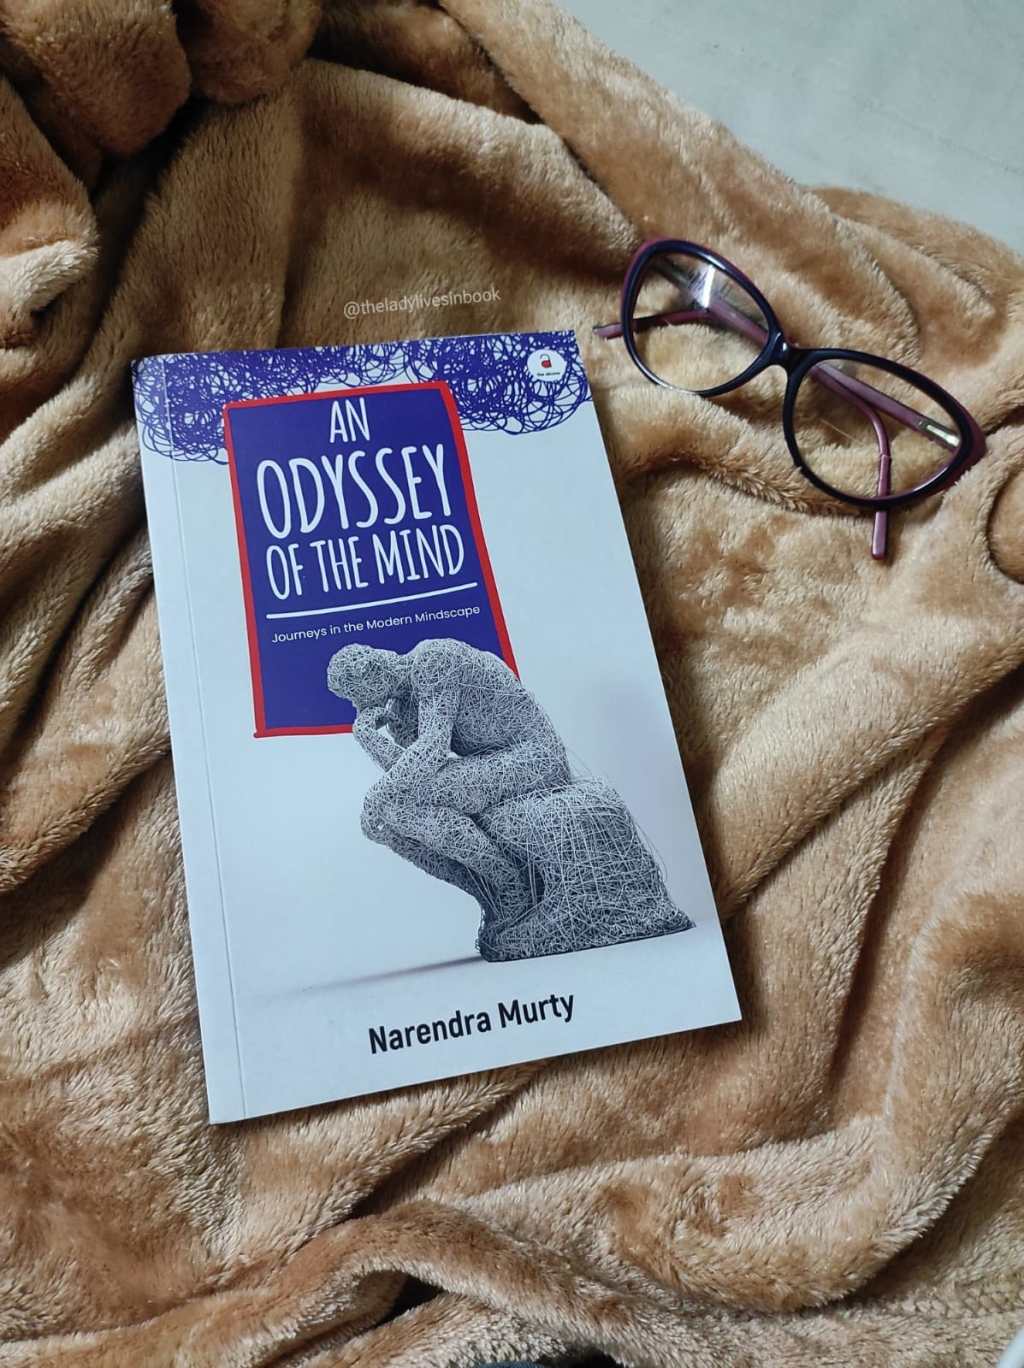 An eye-opening book by Narendra Murti: An Odyssey Of The Mind – Book Review